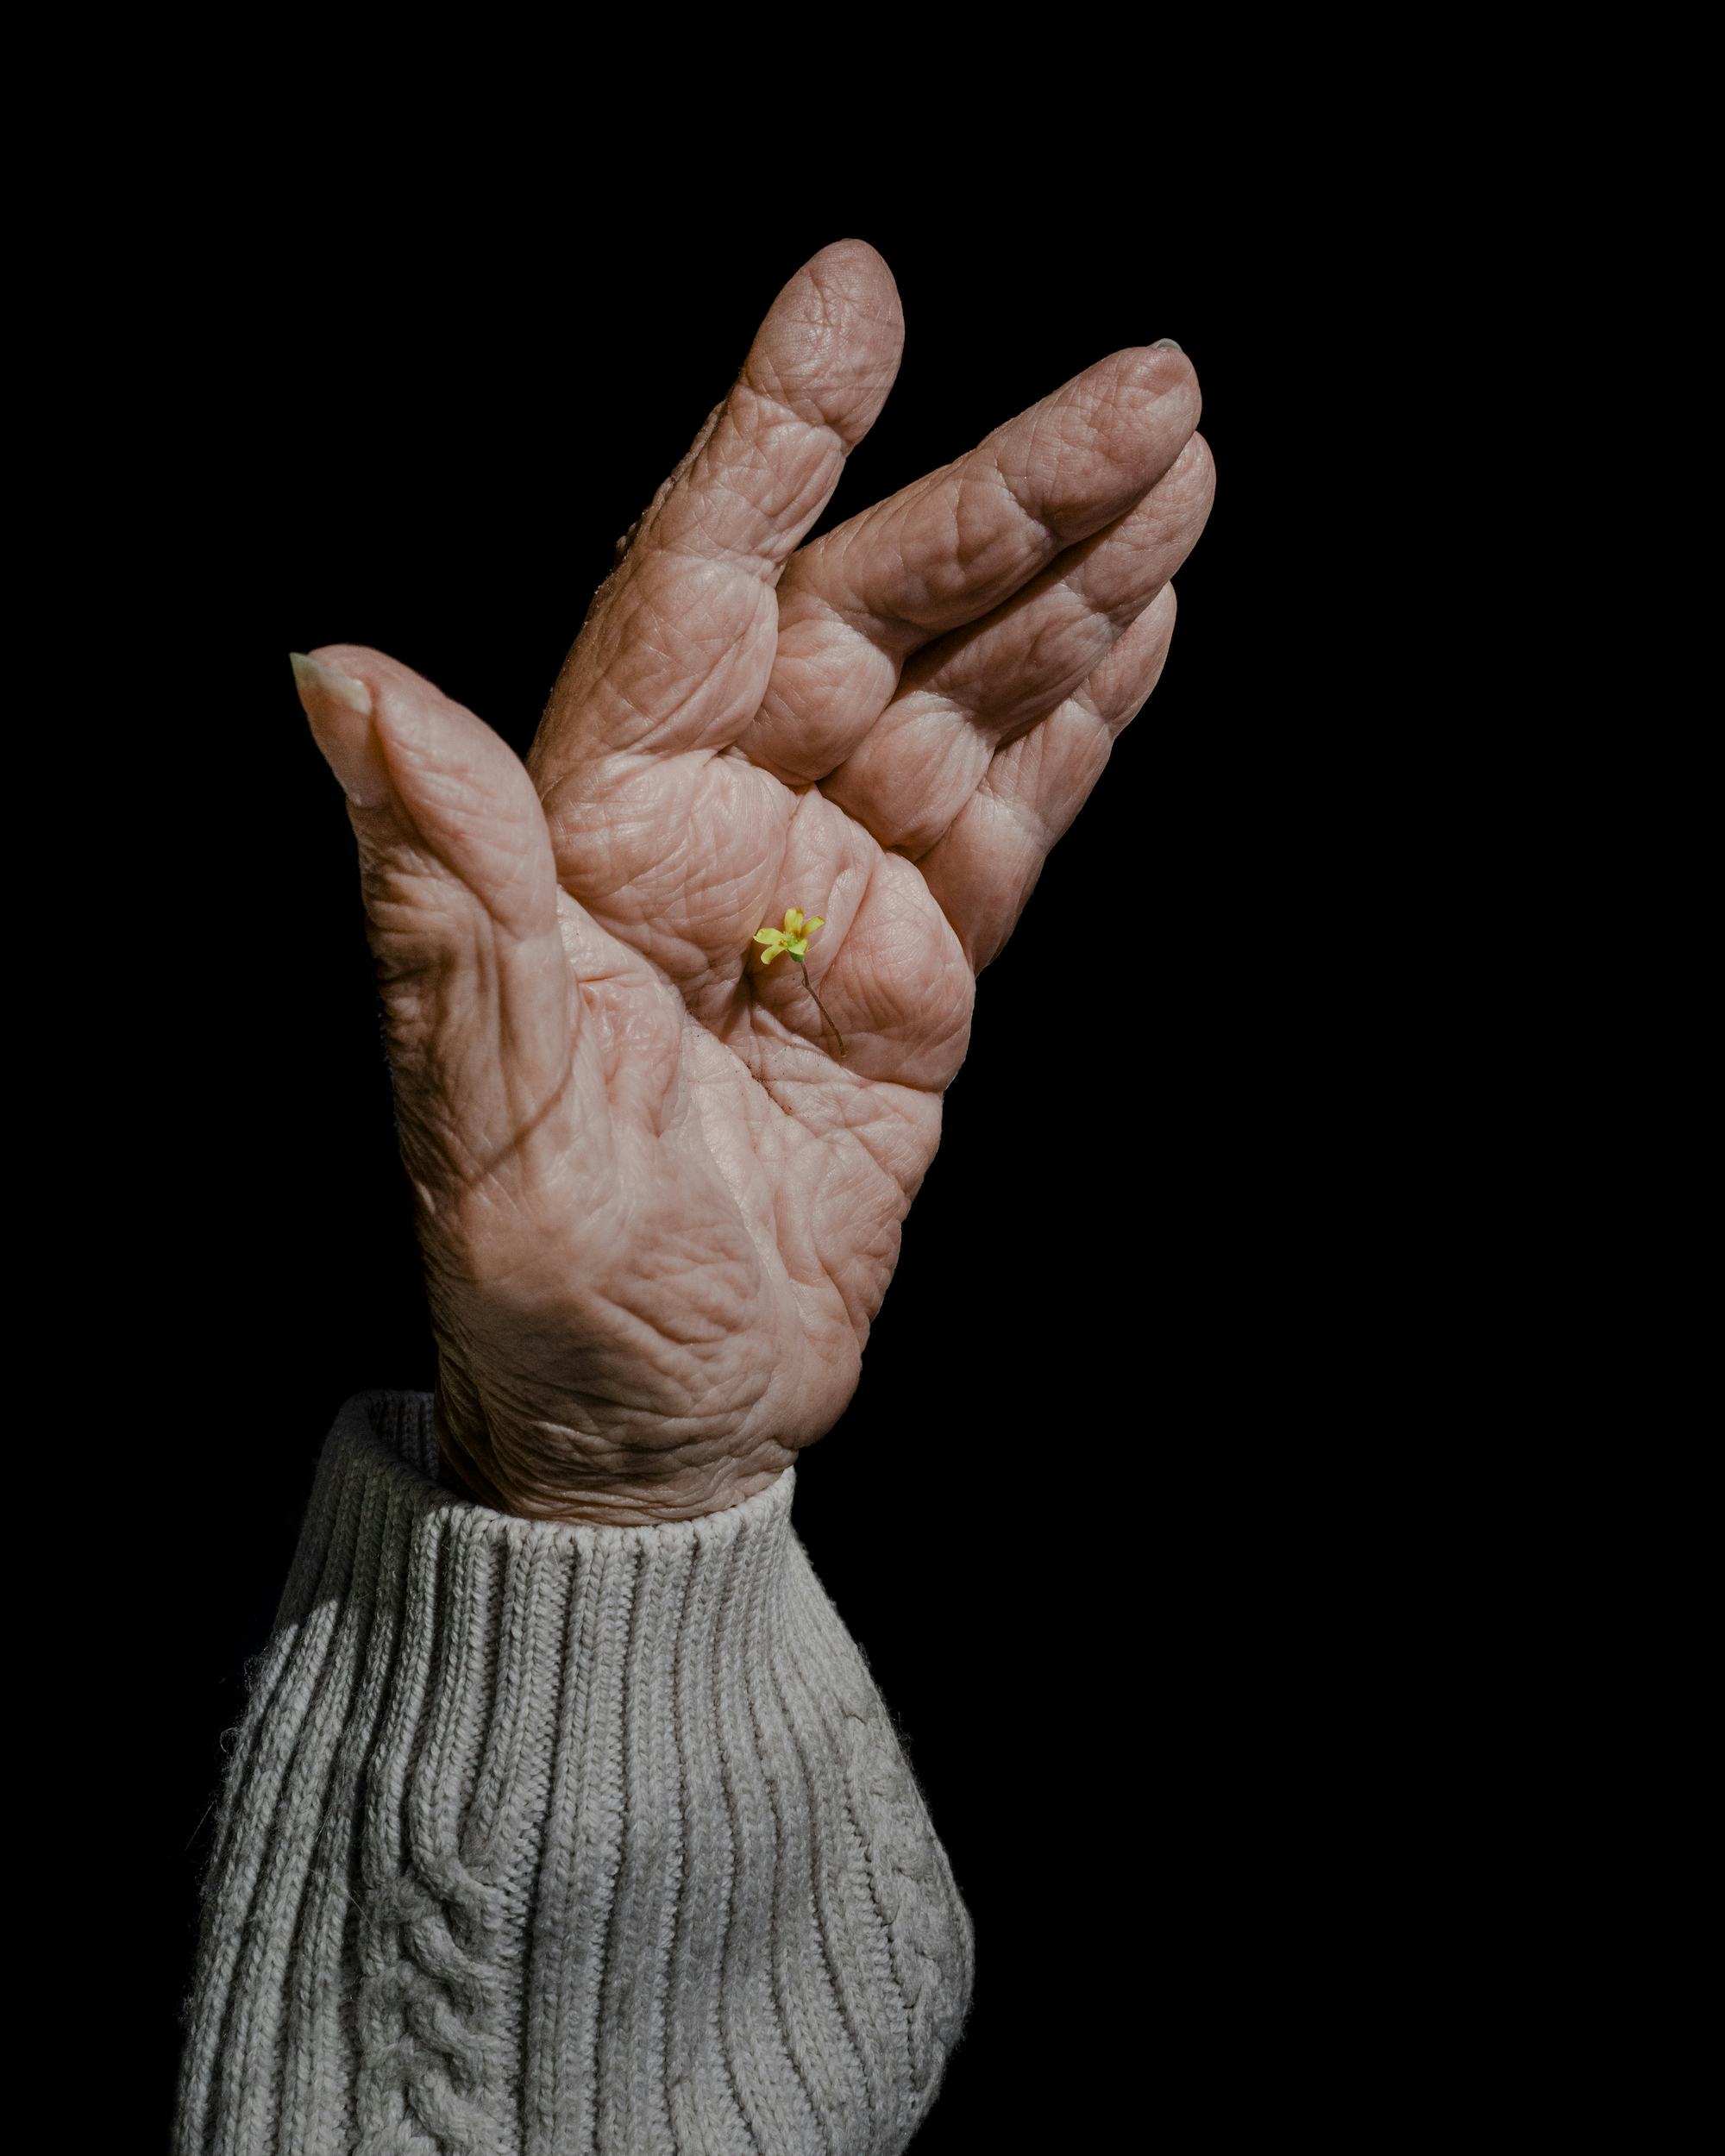 Photograph of an old lady's hand, in front of a black background, holding a tiny yellow flower in the palm of her hand